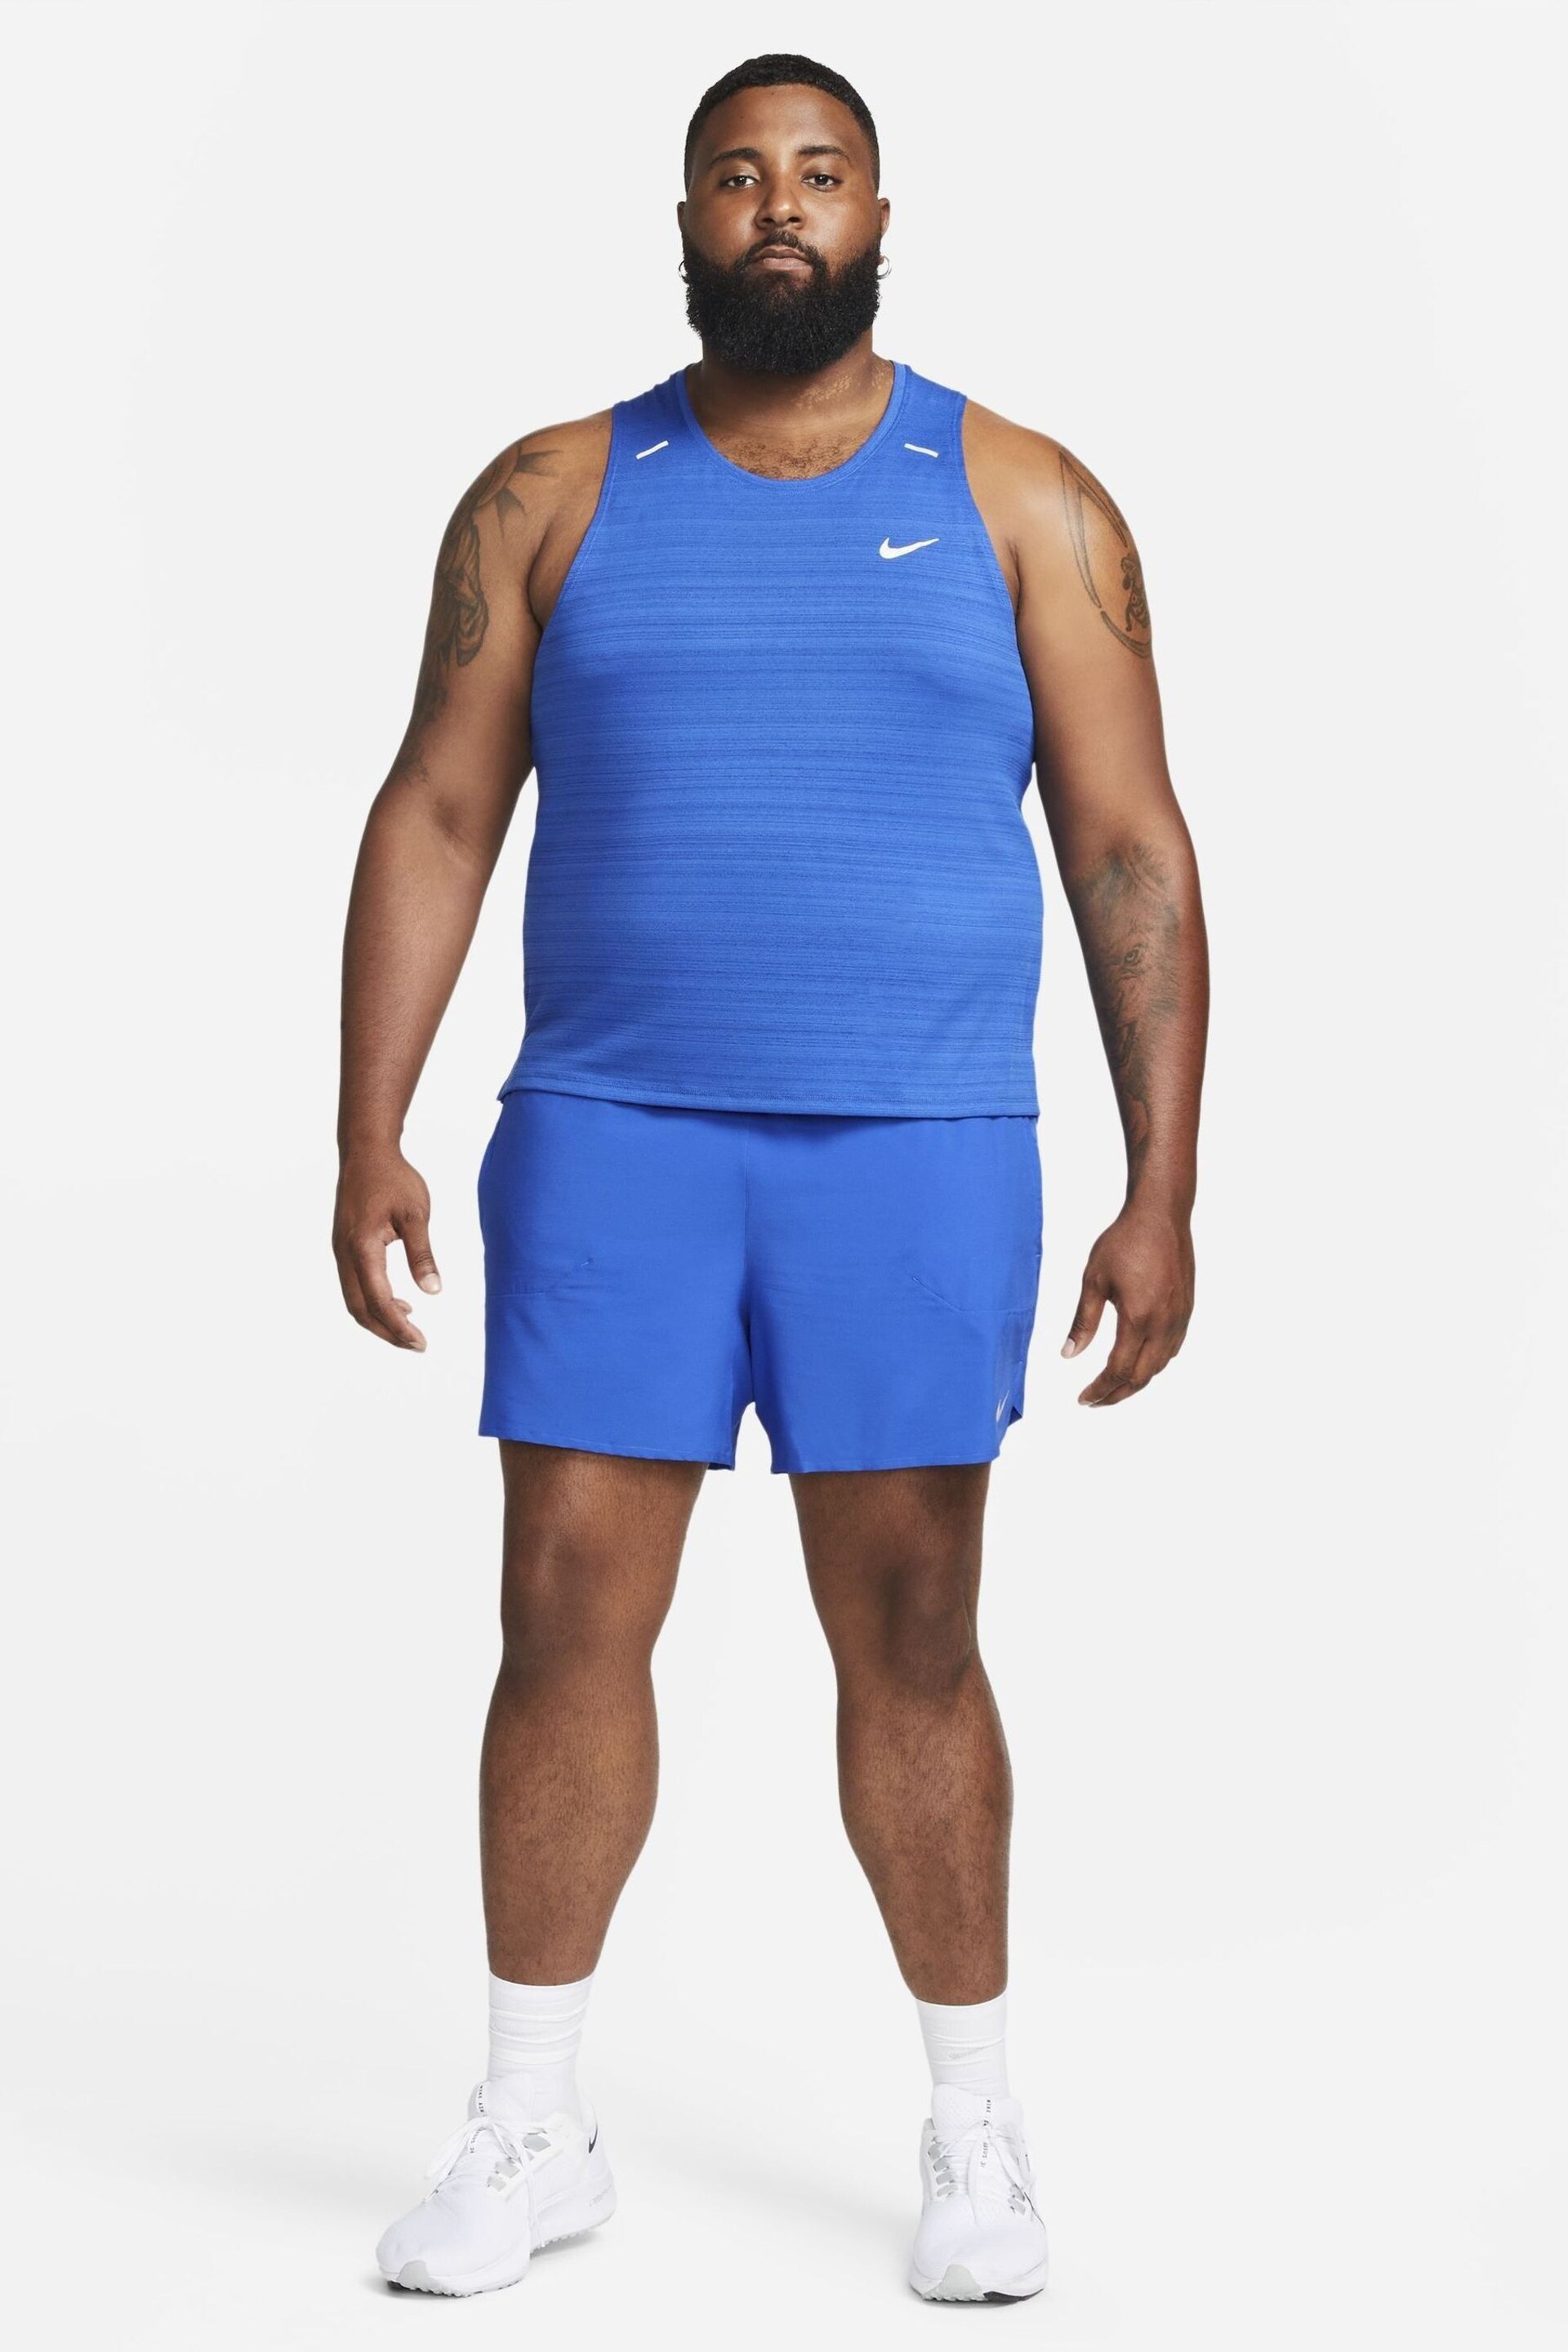 Nike Blue Dri-FIT Stride 5 Inch Running Shorts - Image 7 of 16